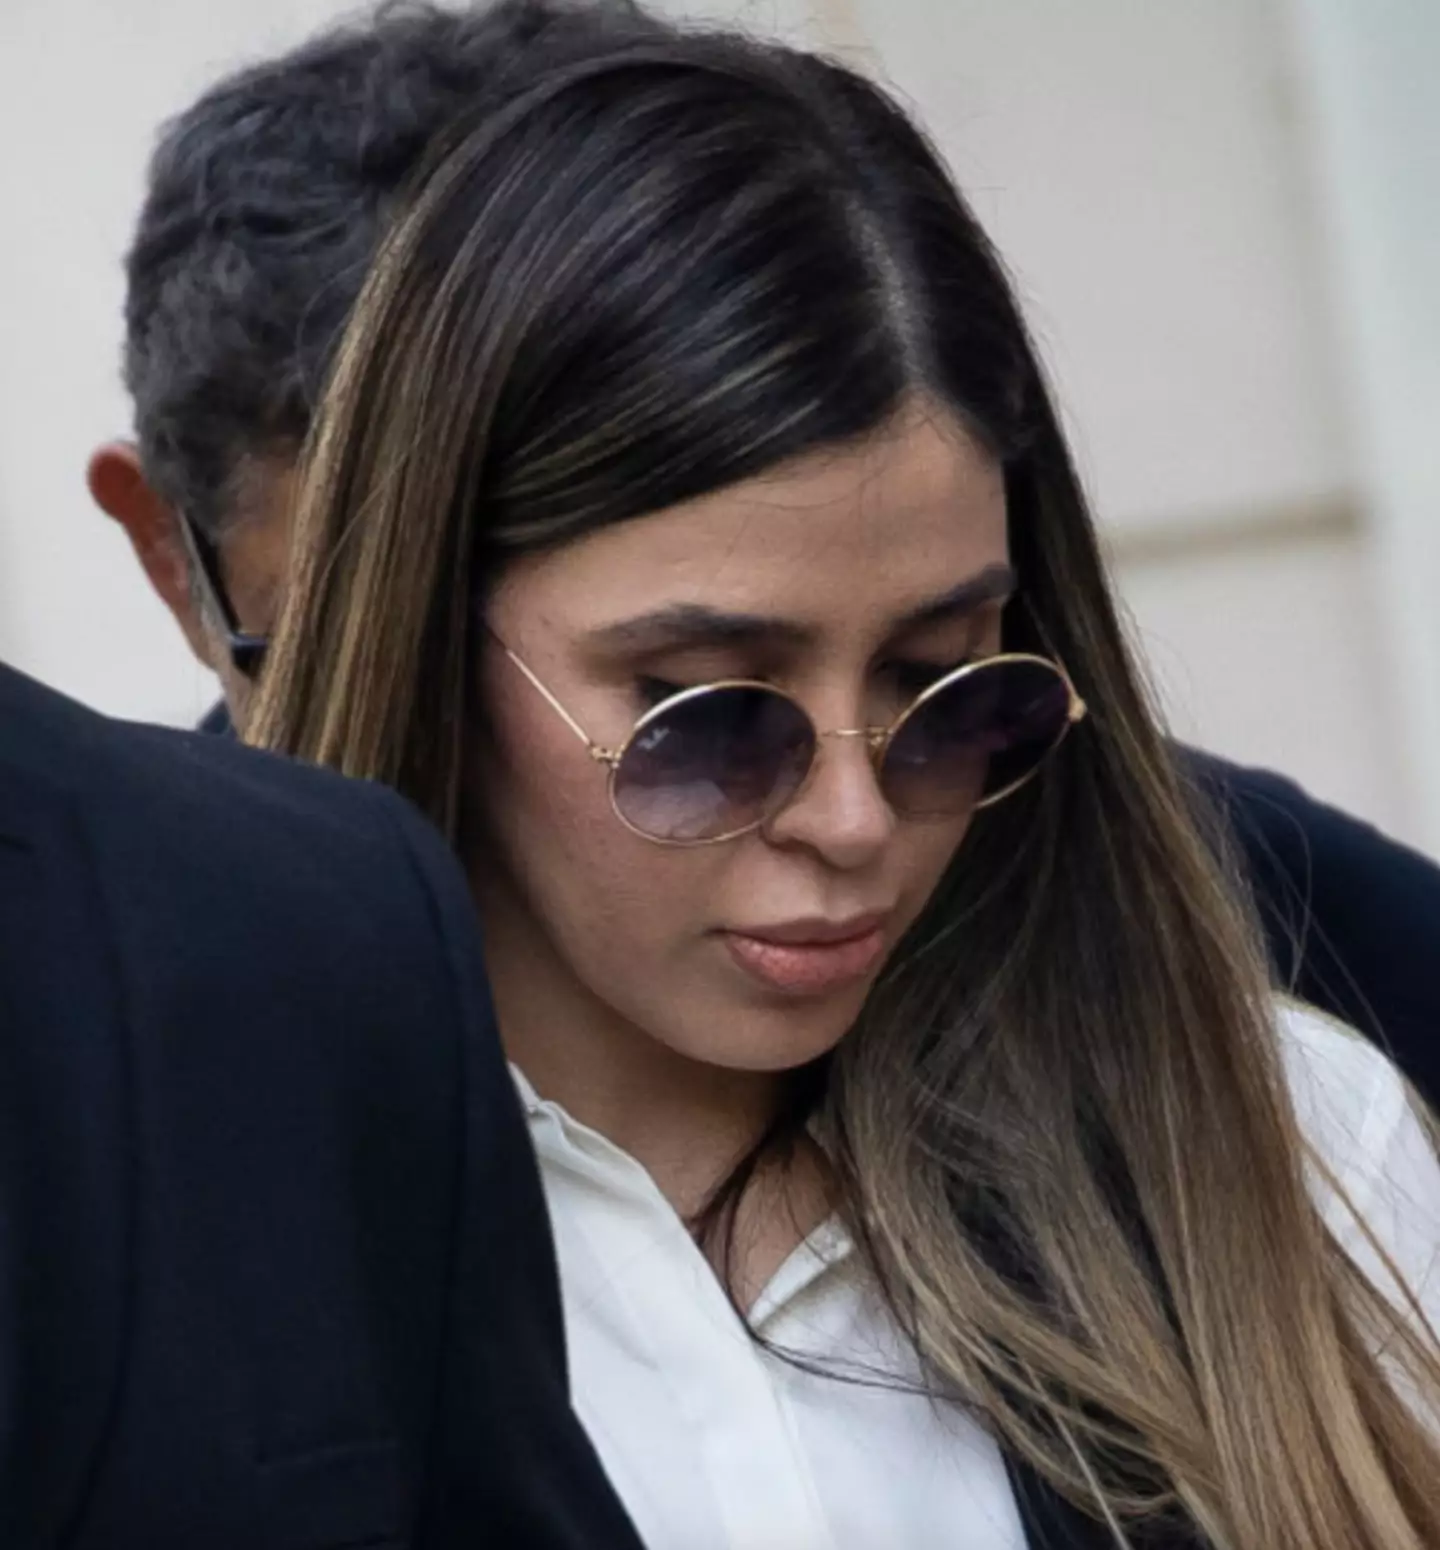 Coronel Aispuro will serve four more years of probation upon her release.